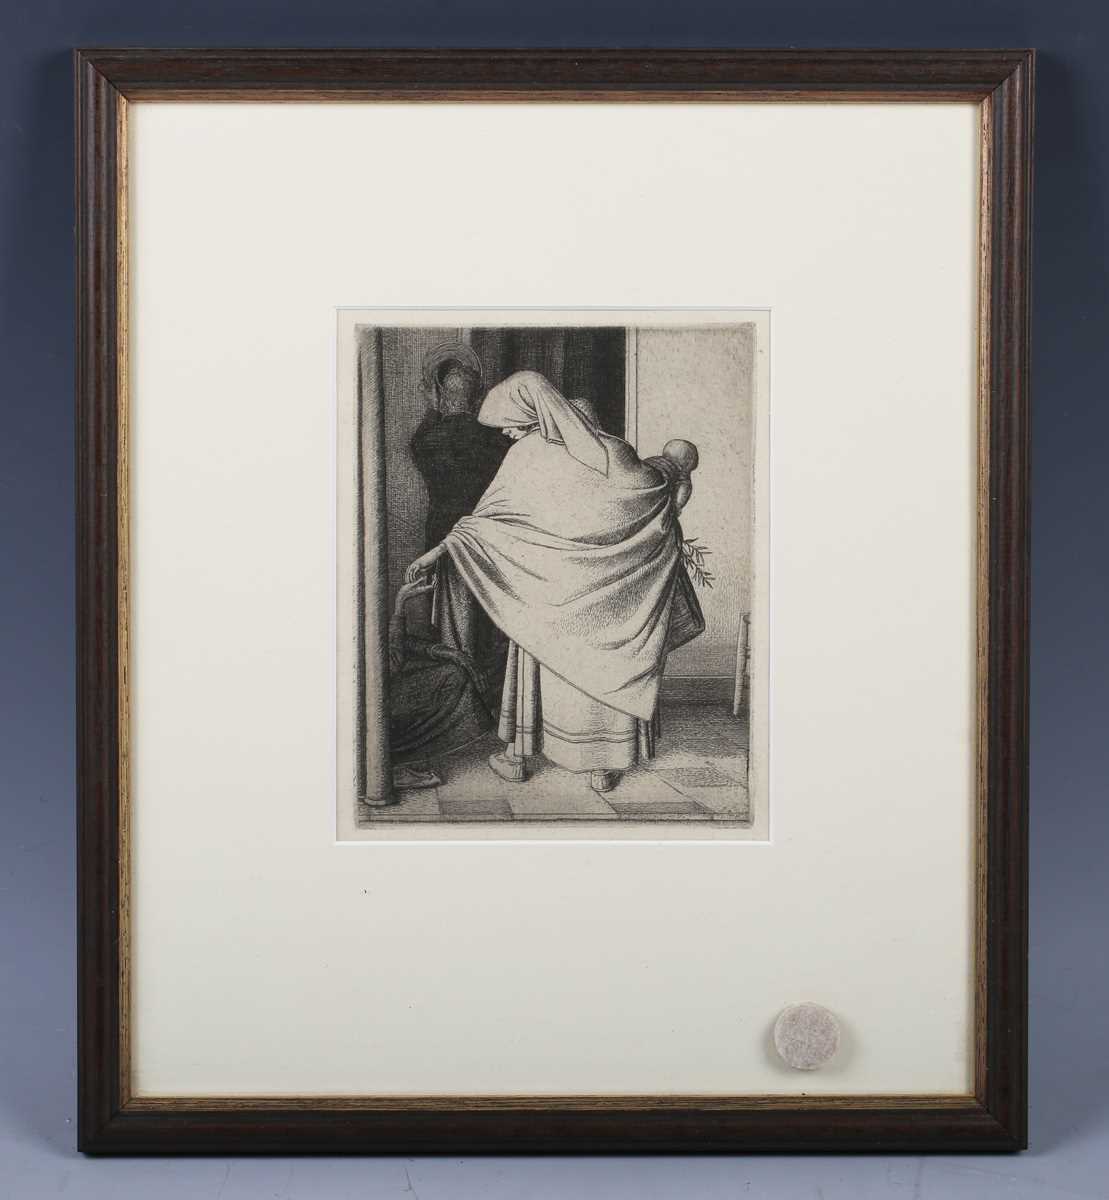 Margaret Dorothy Barker – ‘Woman in Garden’, early 20th century lithograph, signed in pencil - Image 6 of 9